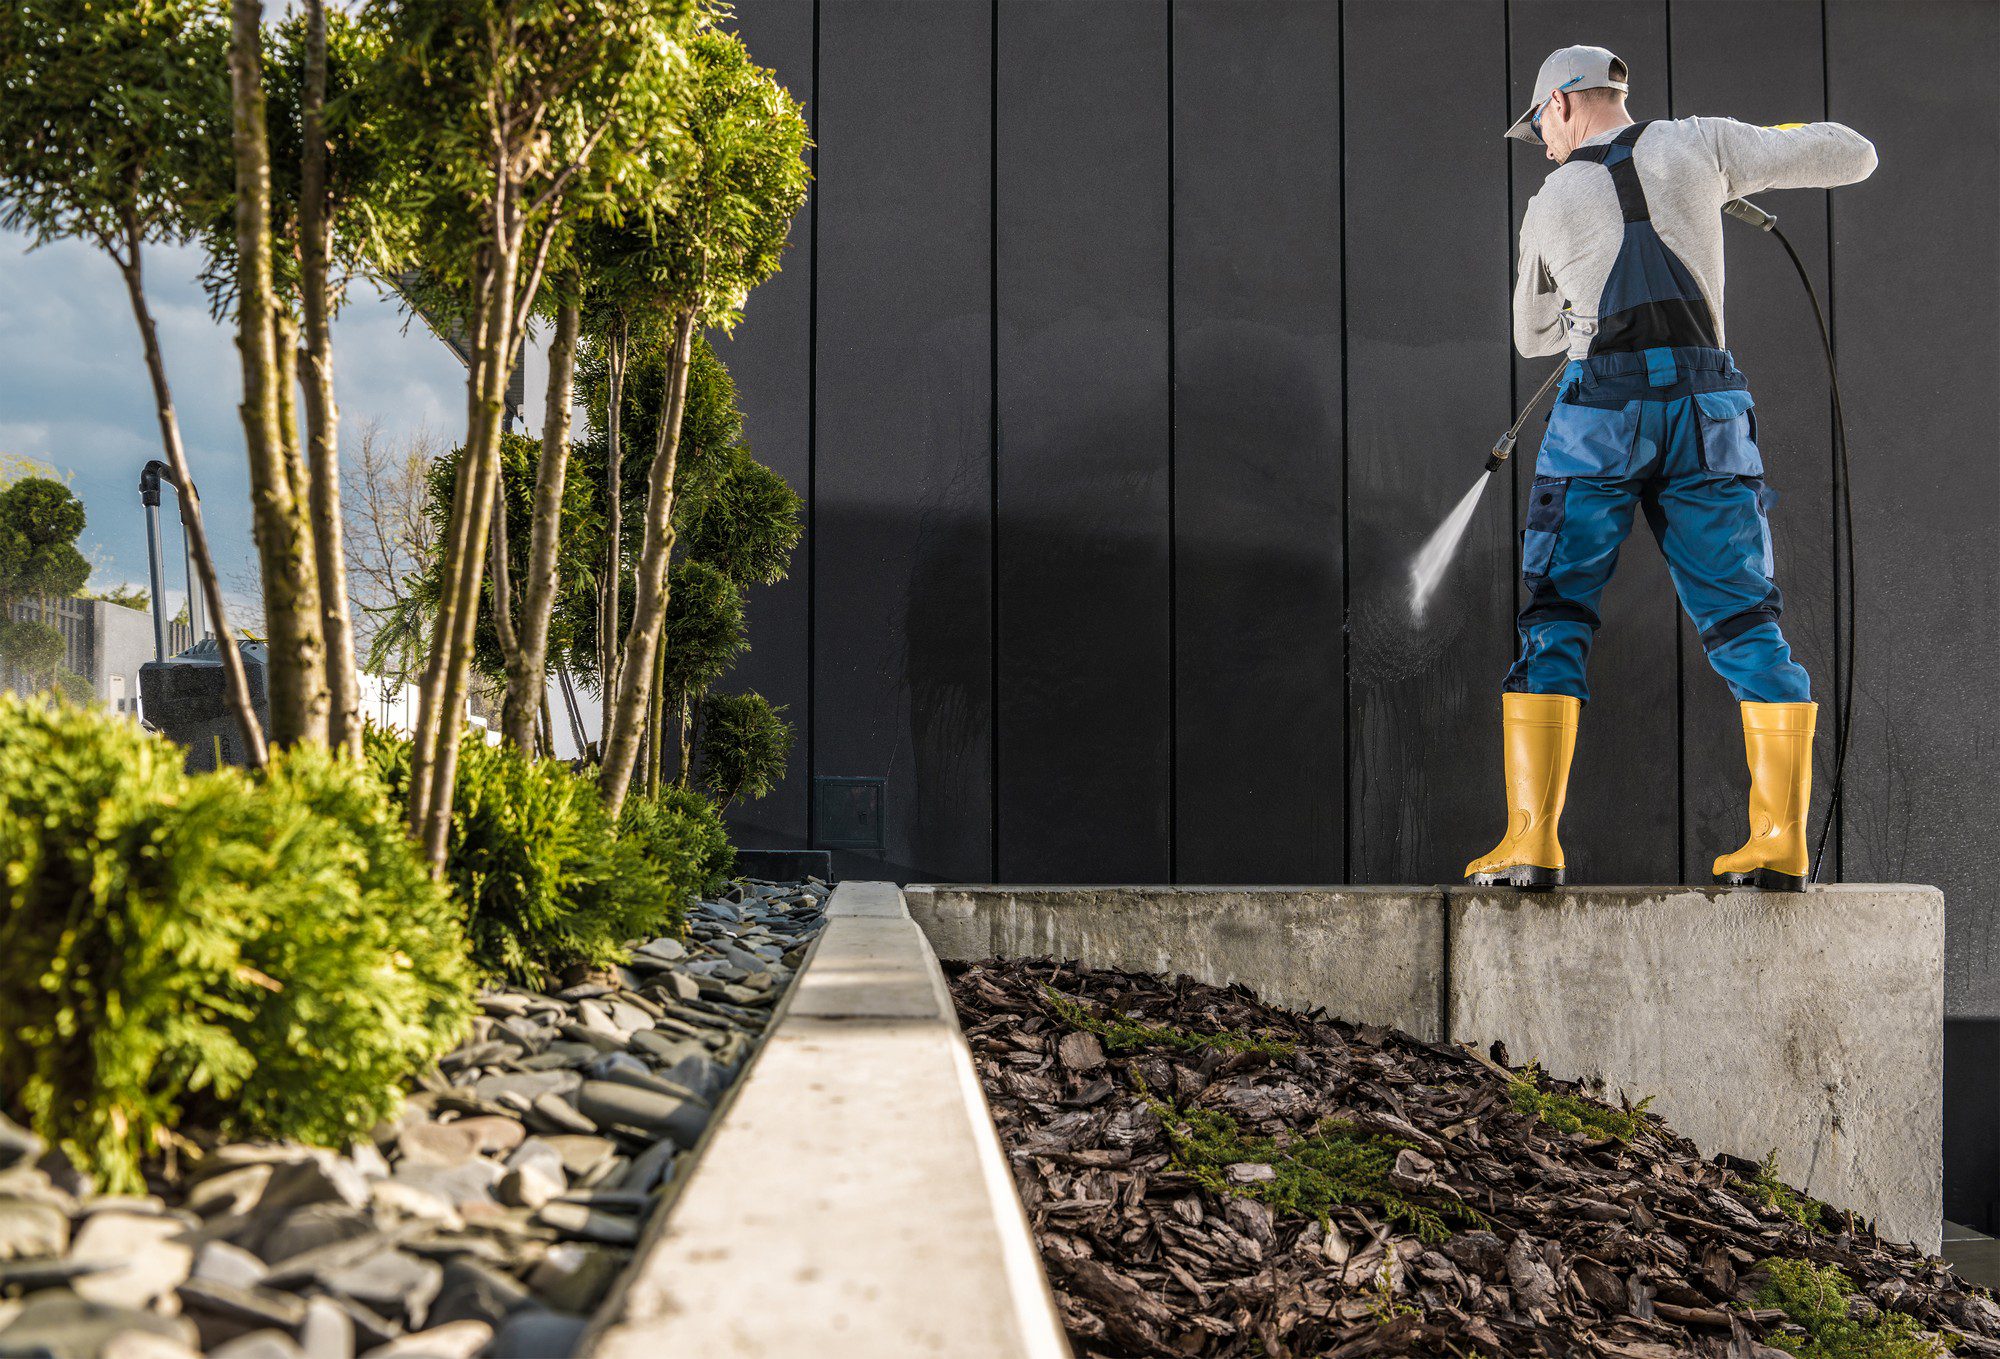 The image shows a person cleaning a black vertical surface using a high-pressure water spray. The individual is wearing a cap, a white long-sleeve top, blue work overalls, and yellow rubber boots. They appear to be standing on a concrete ledge or platform. To the left, there is landscaping with a variety of plants and shrubs, with a decorative layer of rocks and organic mulch. It looks like a maintenance or cleaning task being performed in an outdoor setting, likely as part of property upkeep. The high-pressure washer is creating a visible spray of water that is striking the wall and producing a streak of cleanliness against the darker surface, indicating a possibly significant contrast between the cleaned and yet-to-be-cleaned areas.